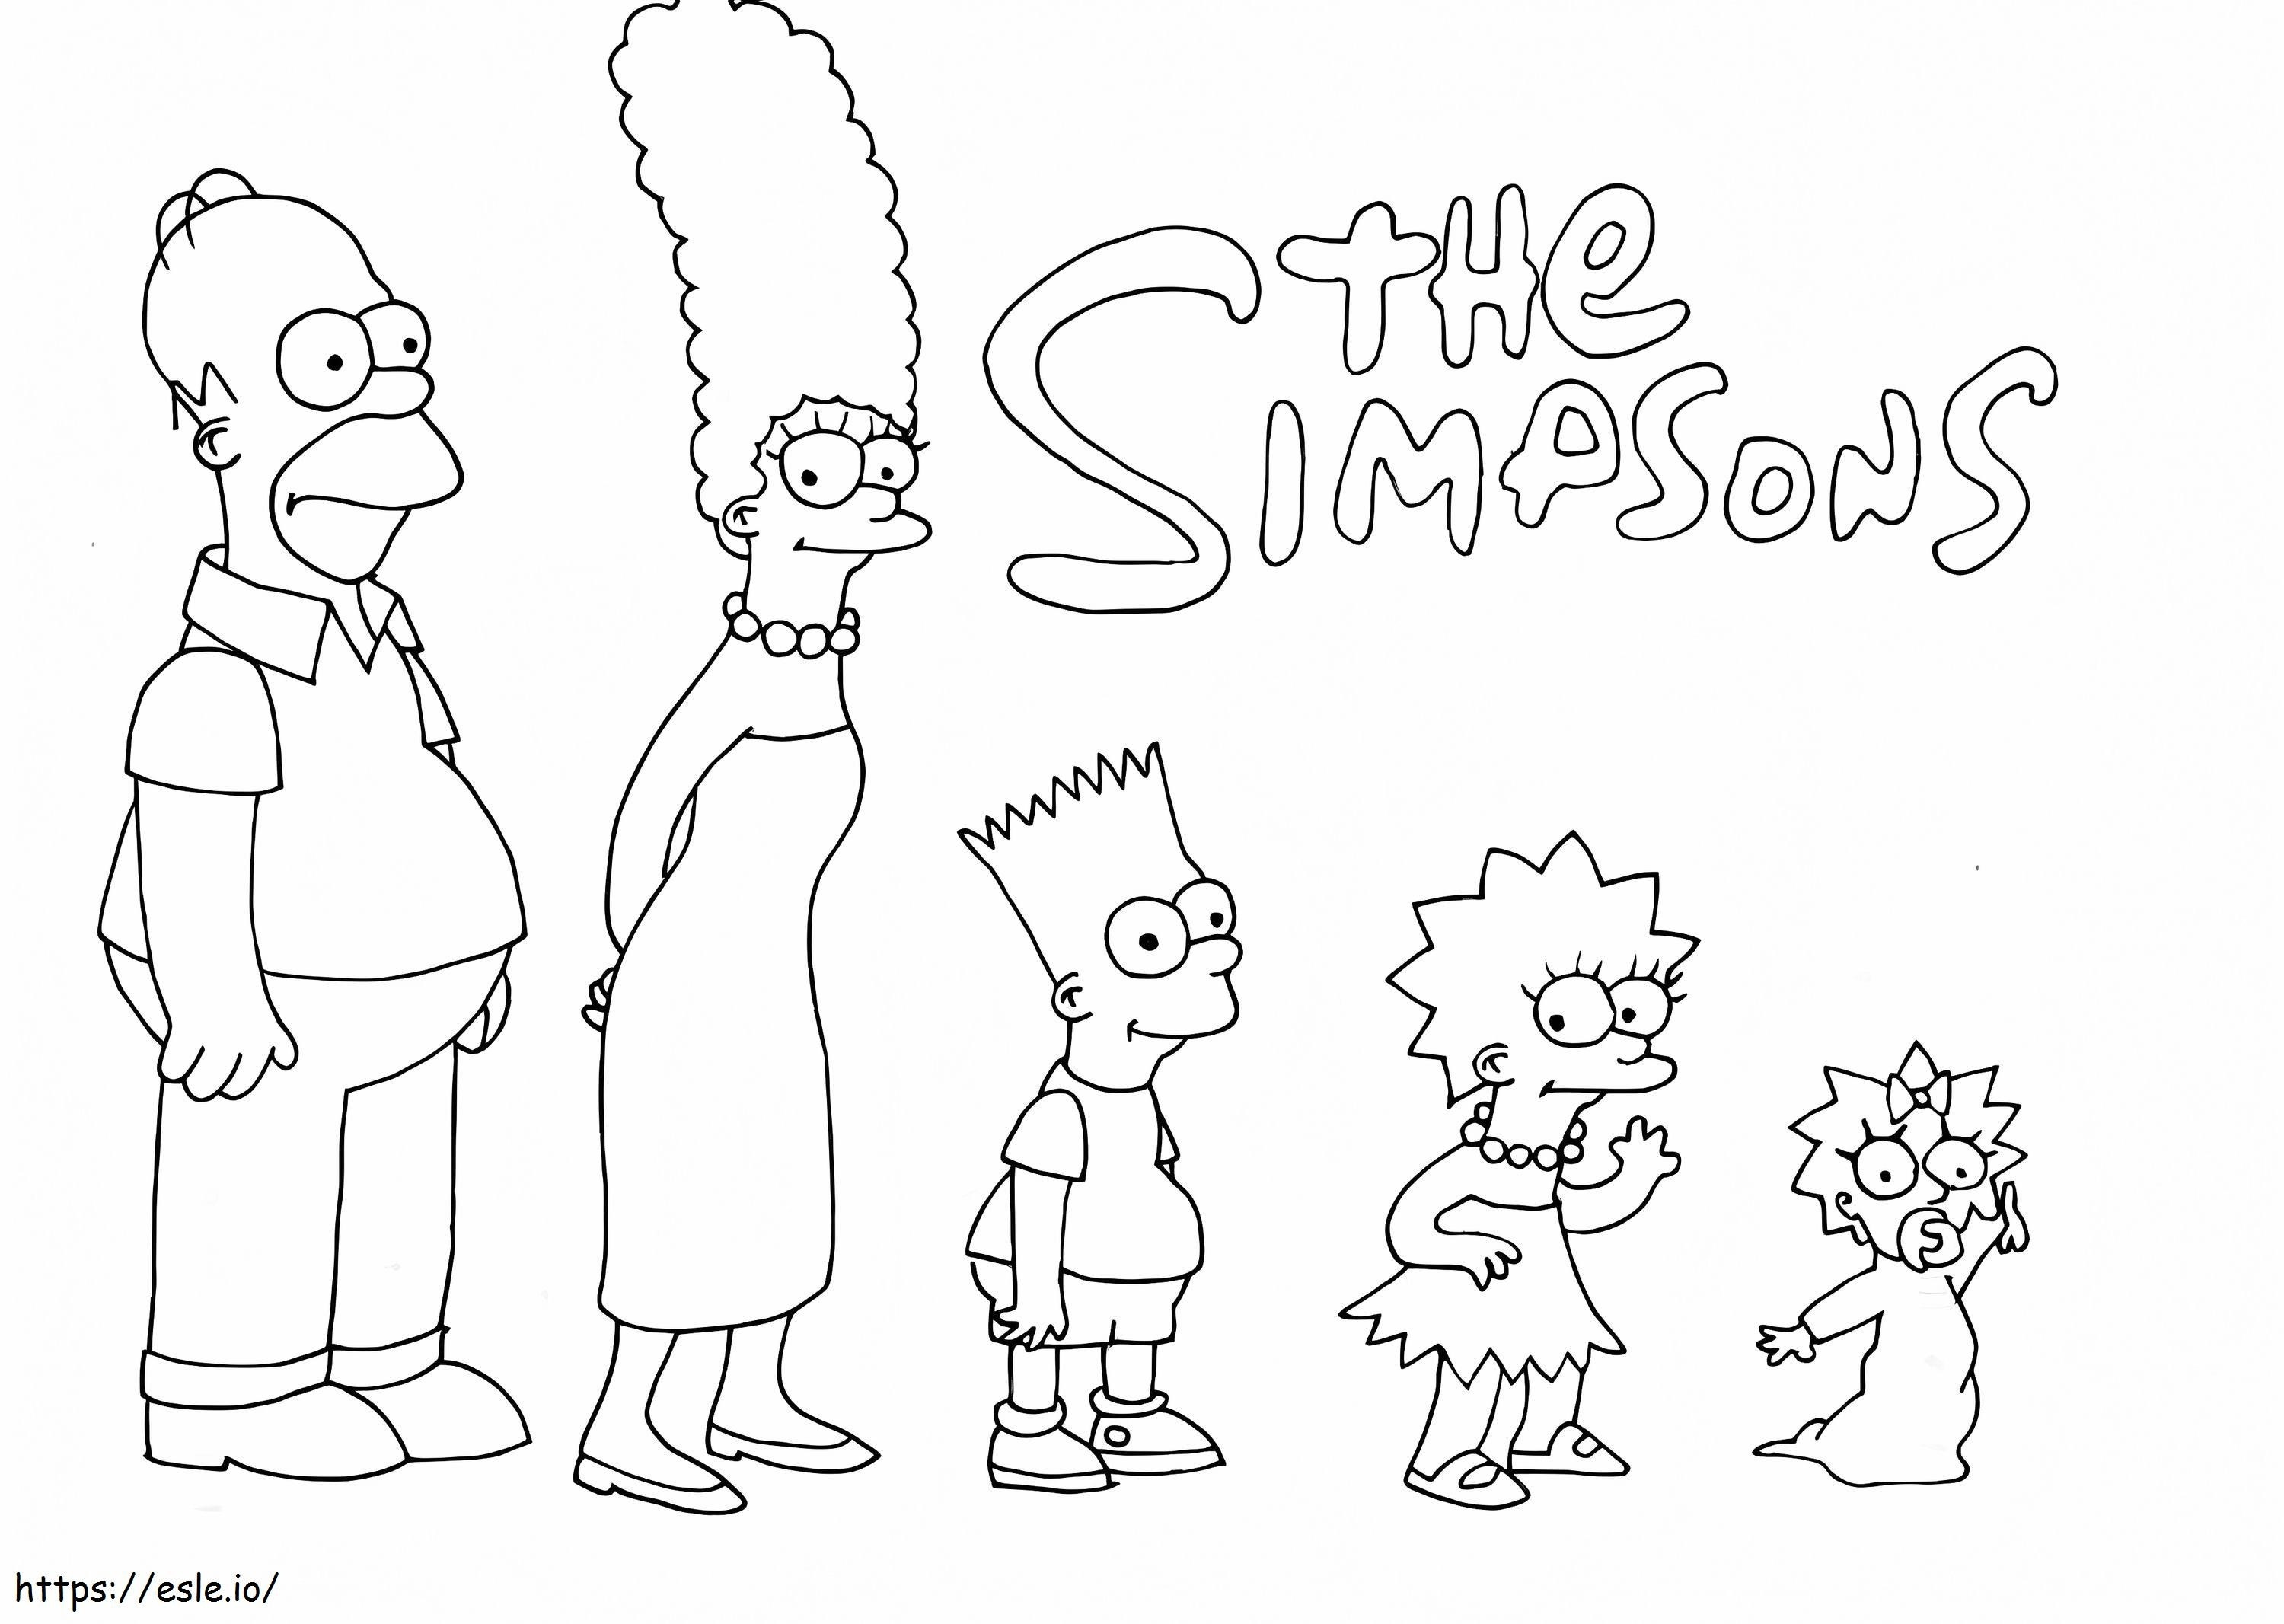 The Cute Simpsons coloring page